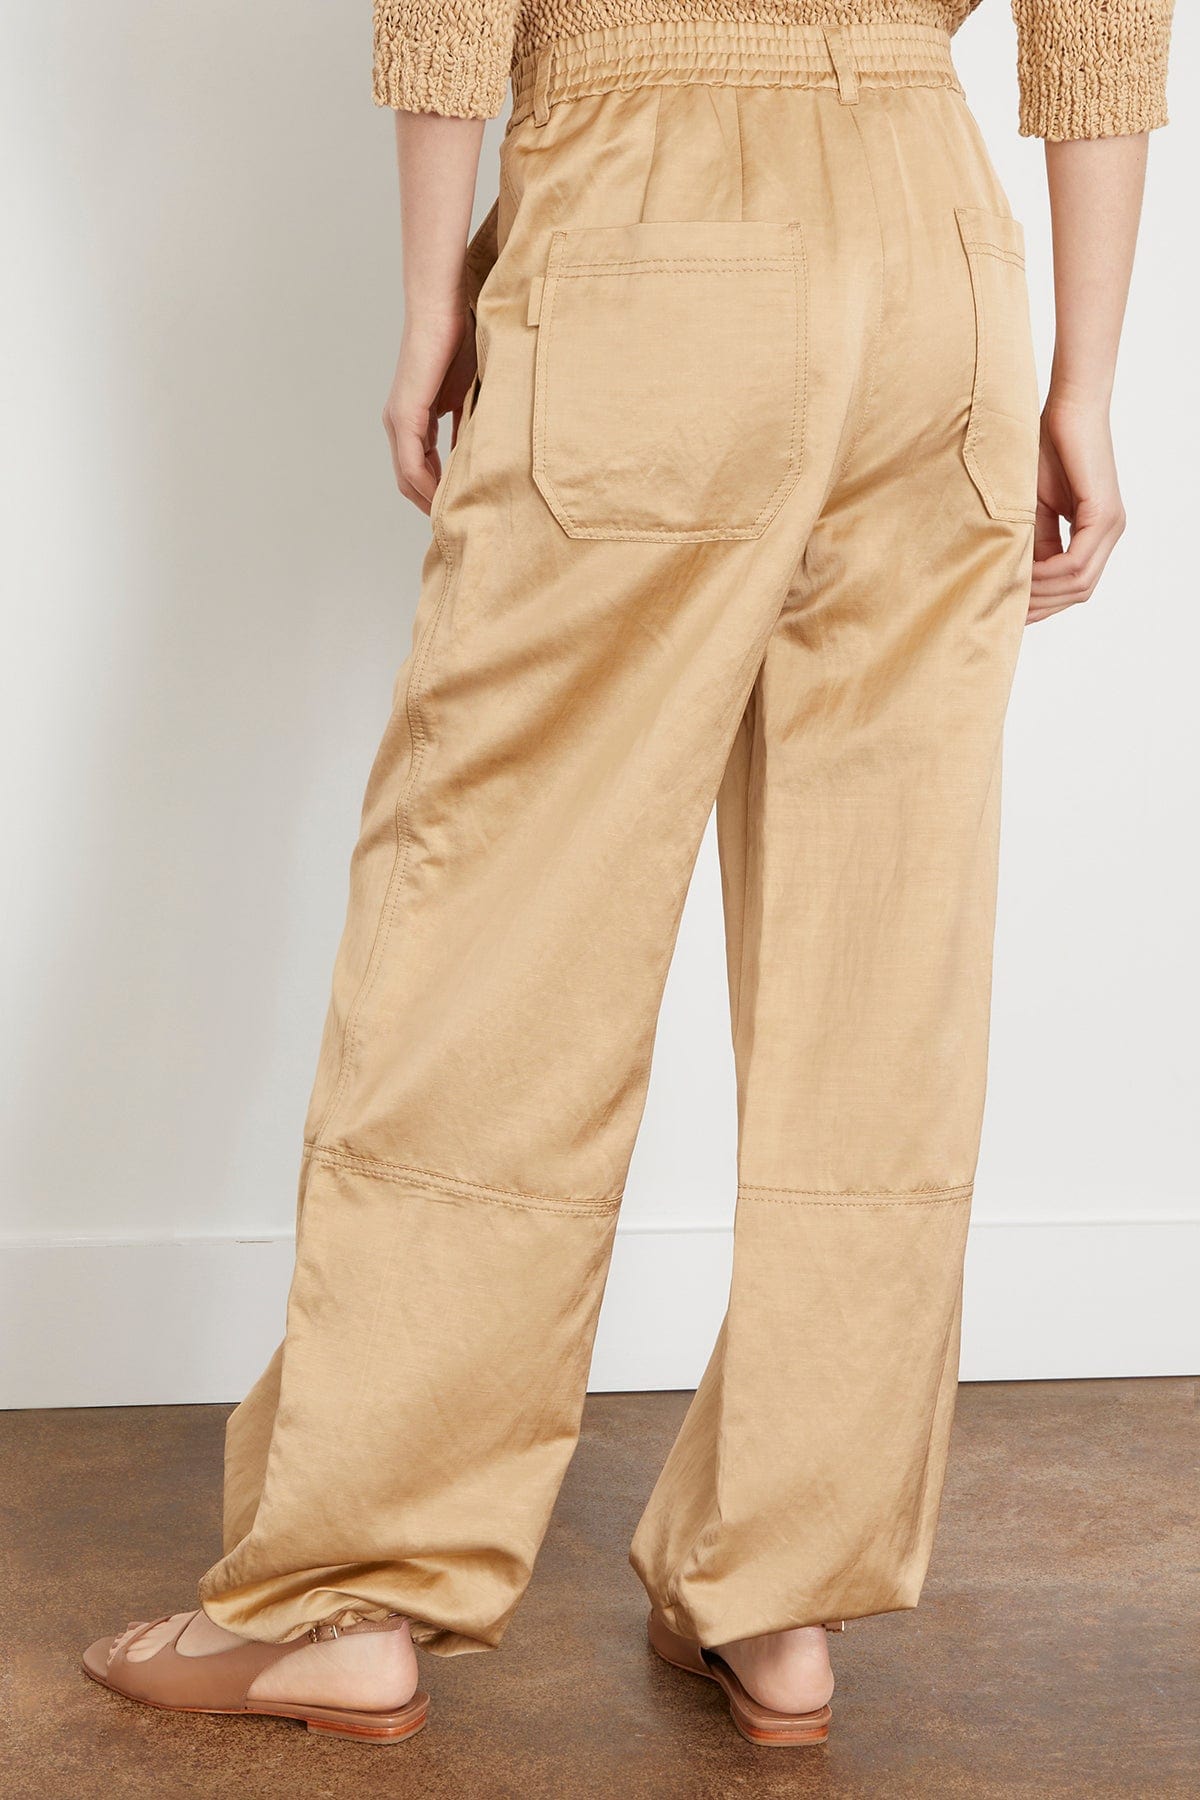 Dorothee Schumacher Pants Slouchy Coolness Cargo Pant in Warm Beige Dorothee Schumacher Slouchy Coolness Cargo Pant in Warm Beige